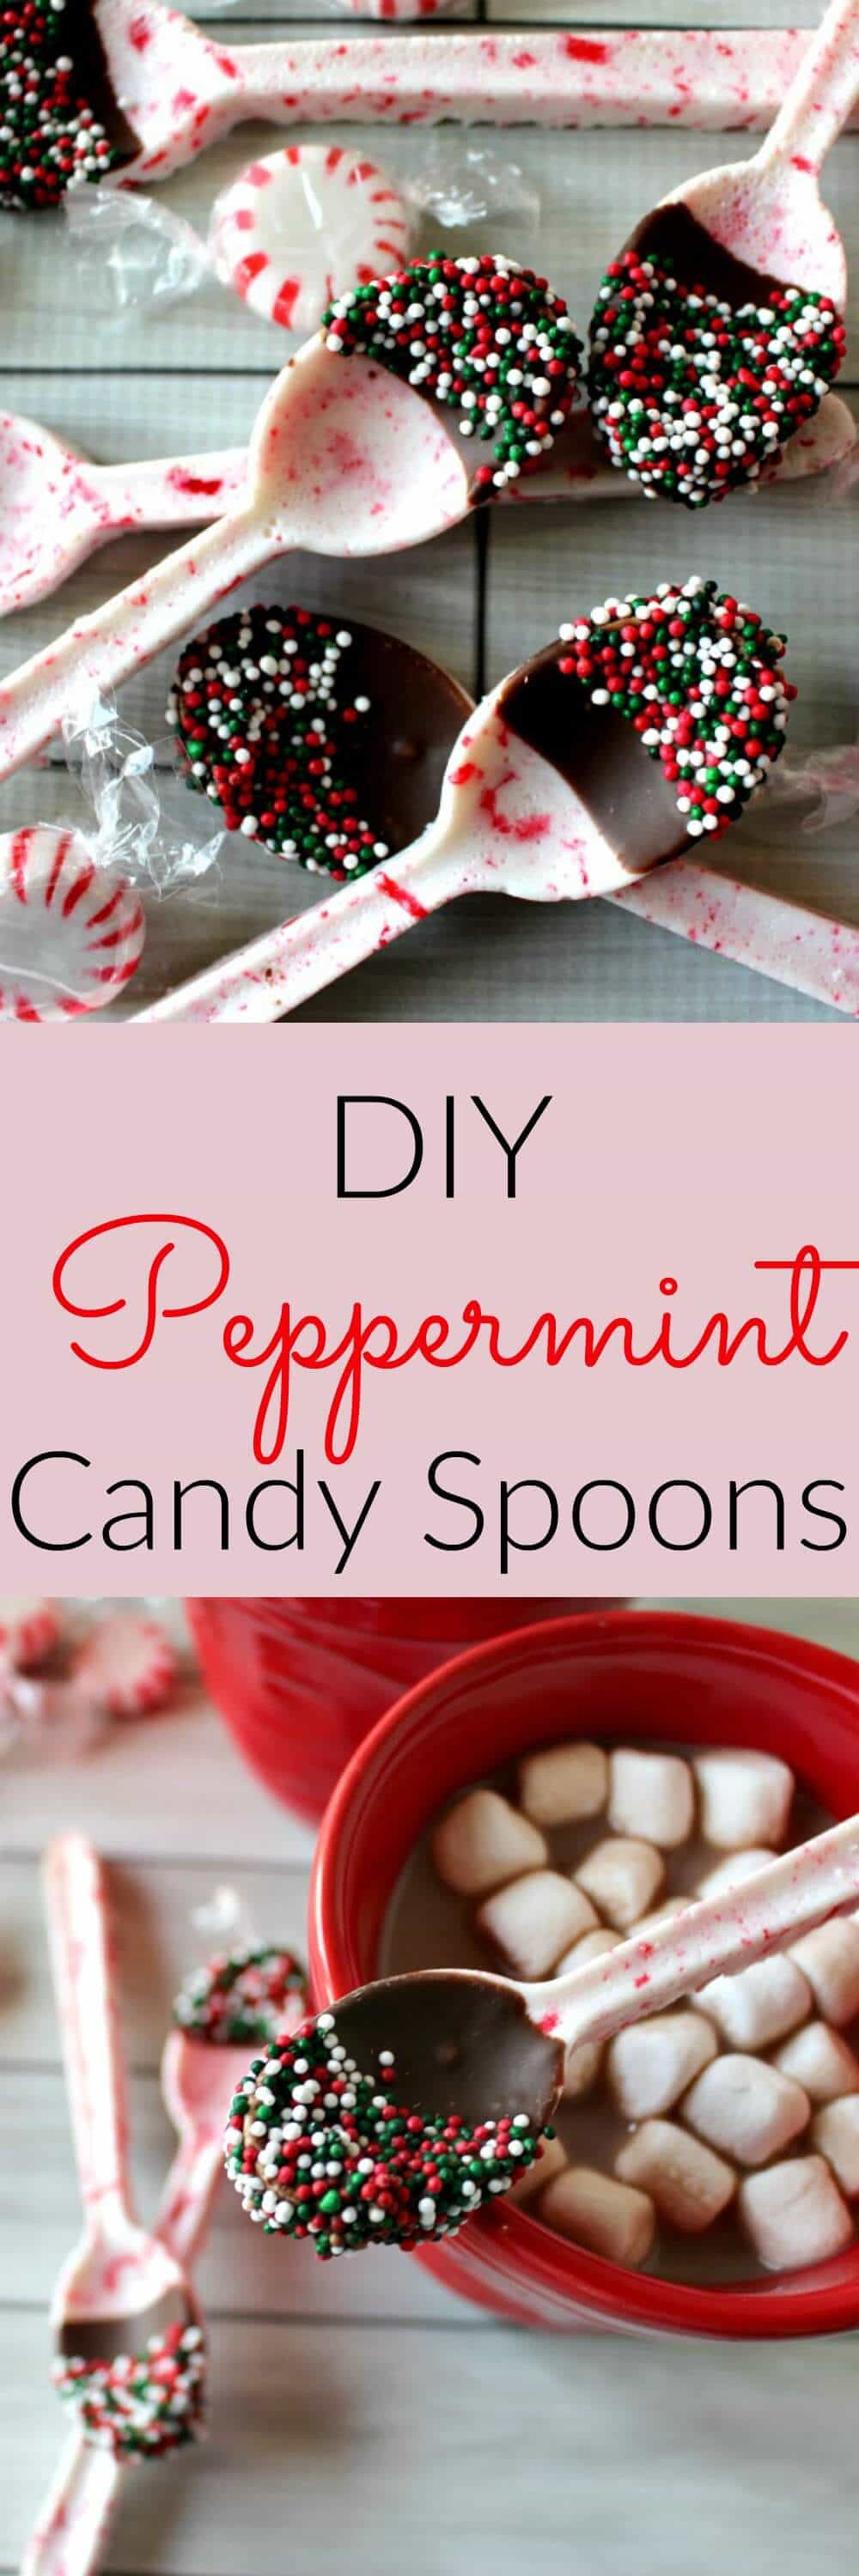 Christmas Candy Gift Ideas
 DIY Peppermint Candy Spoons Princess Pinky Girl